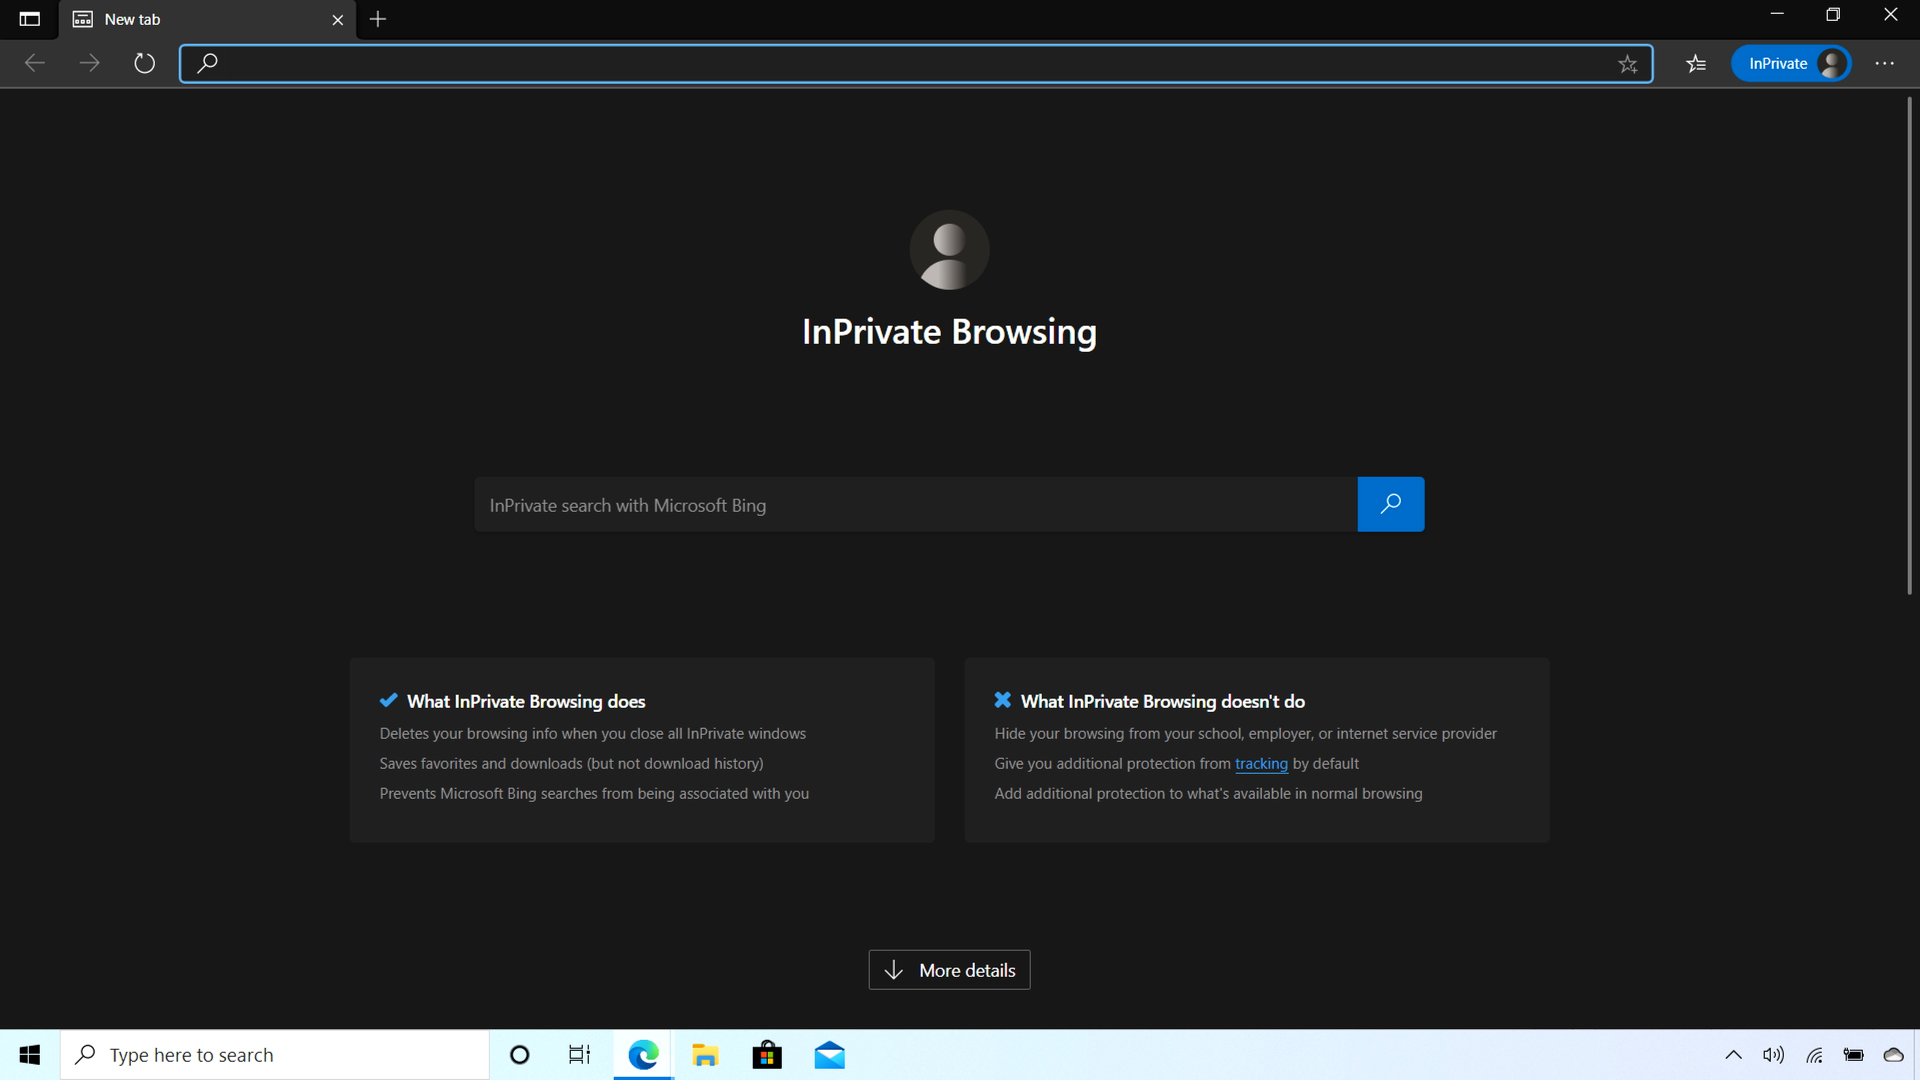 InPrivate browsing user interface